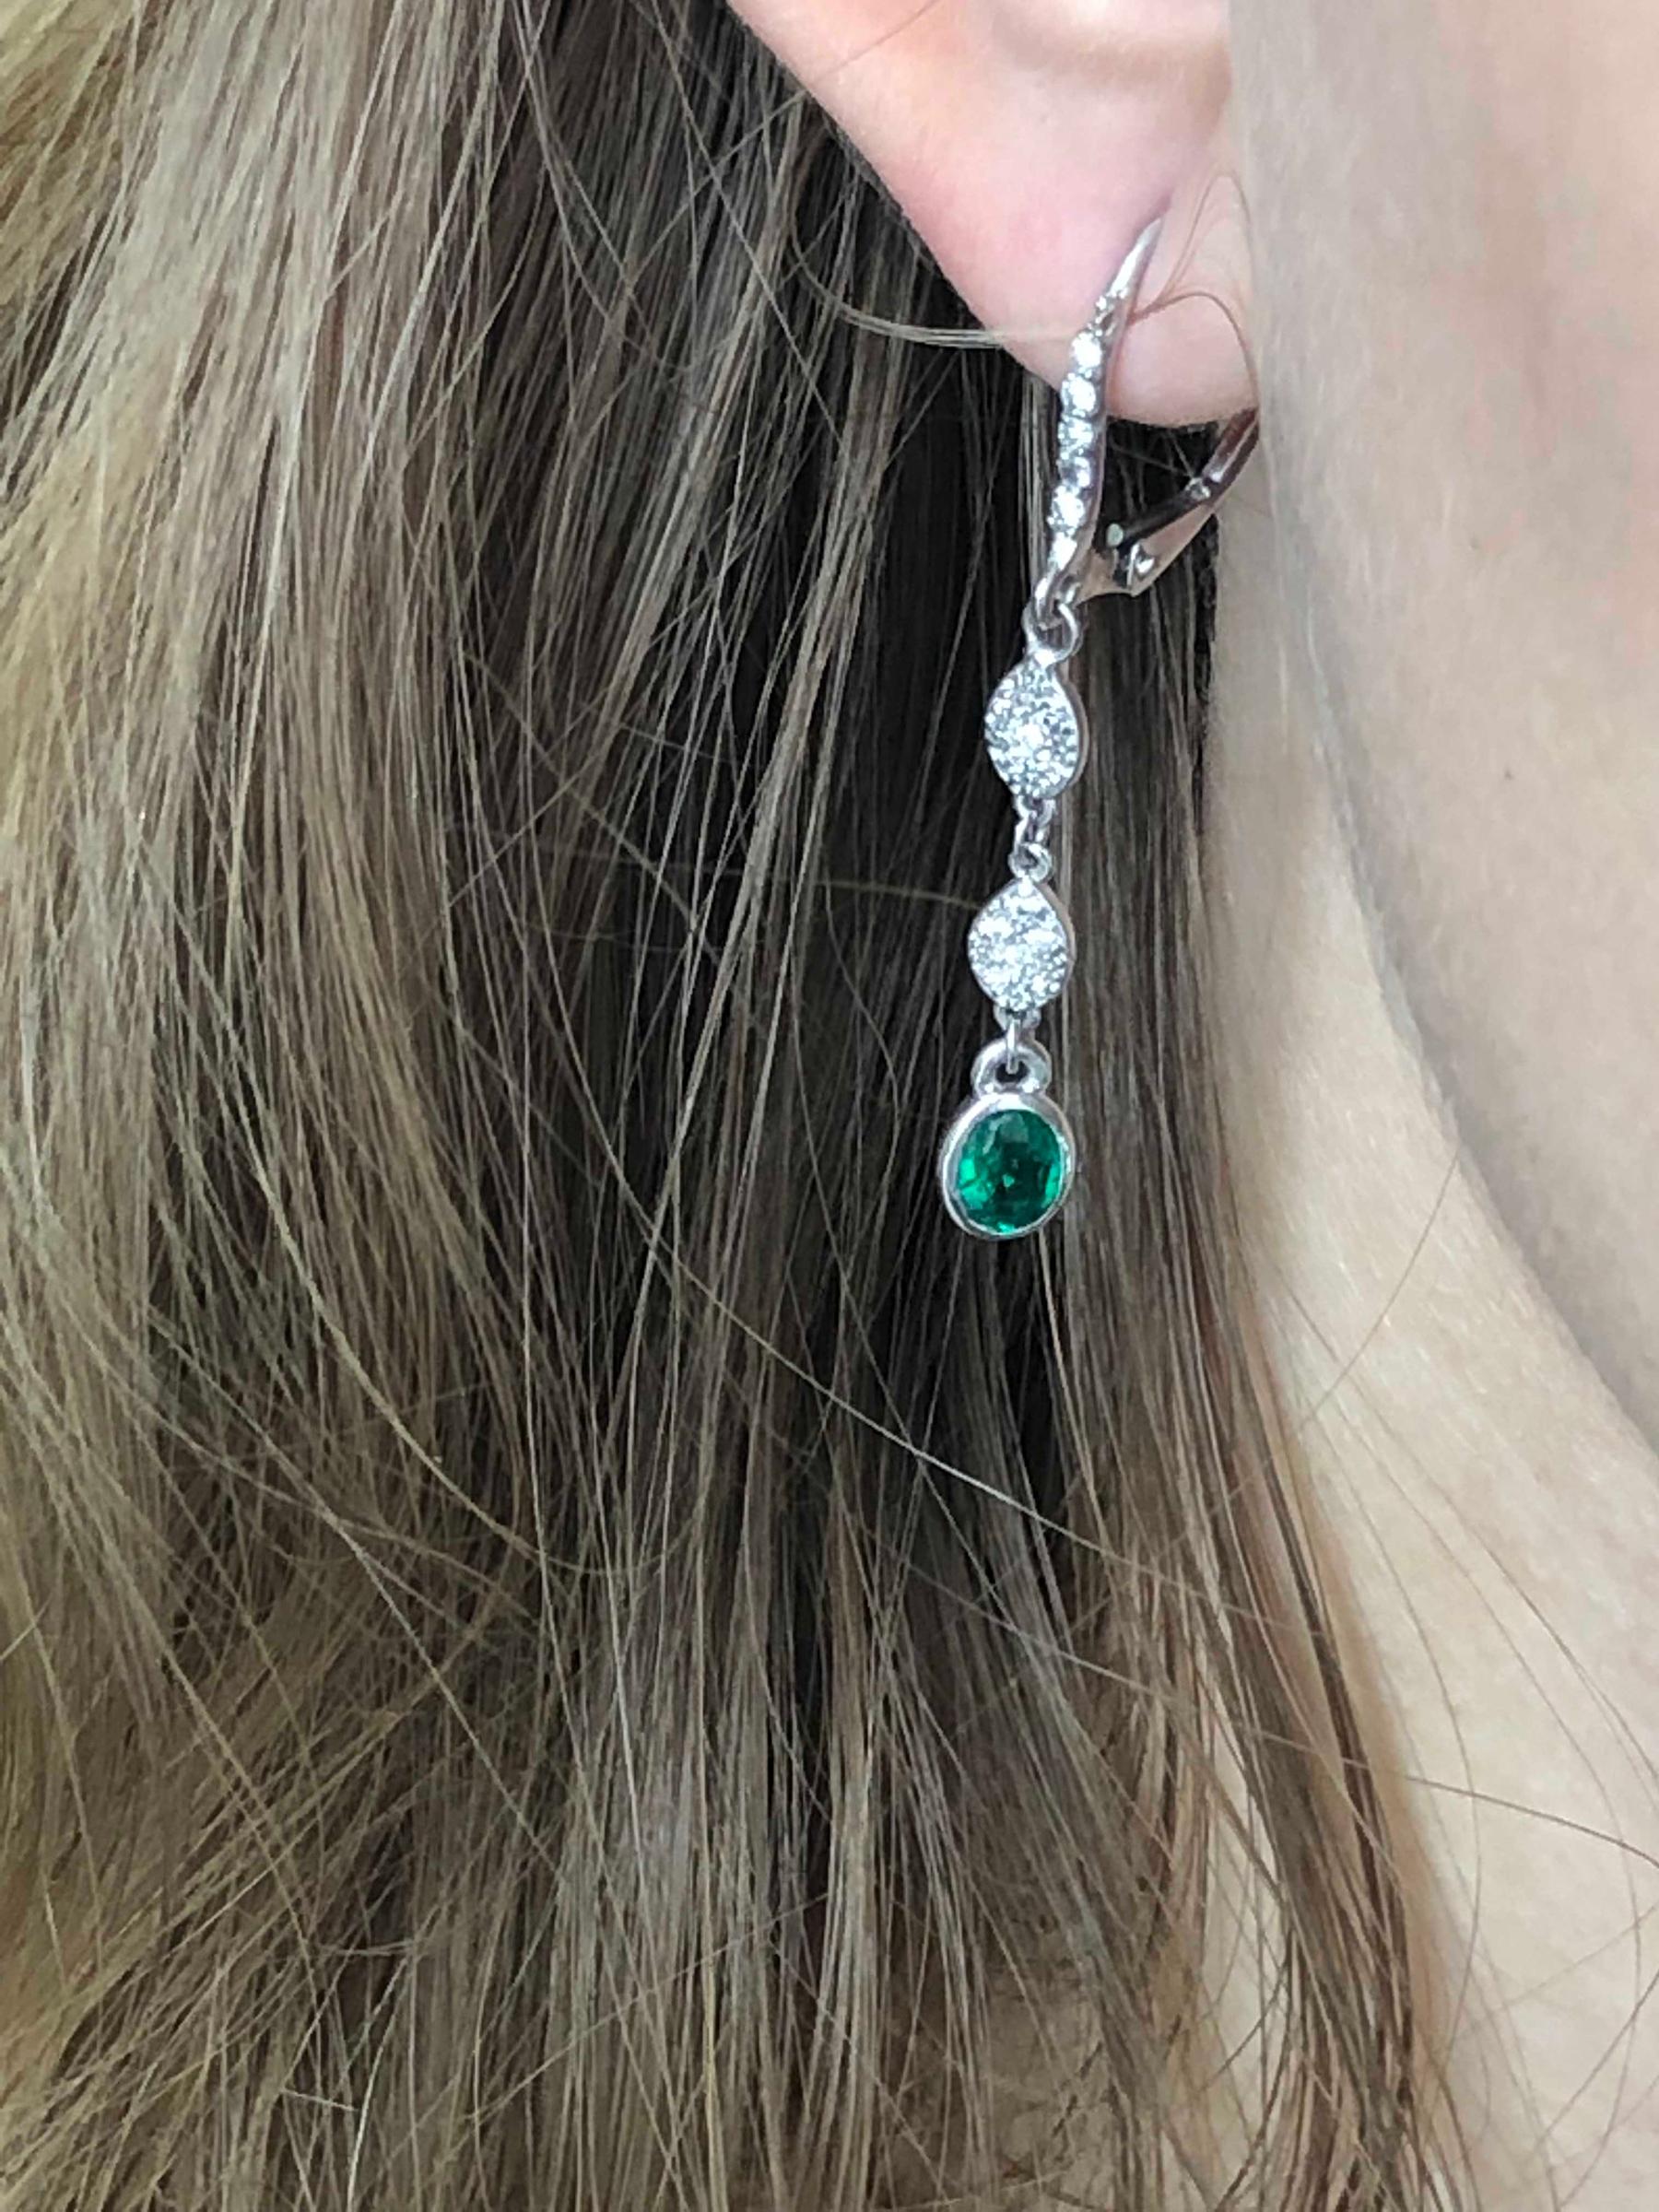 14 karat white gold hoop one and a half inch long drop earrings 
Diamond weighing 0.45 carat
Emeralds weighing 0.95 carat 
New Earrings
Handmade in USA
Our design team select gemstones for their quality, aesthetic beauty and sale value of the